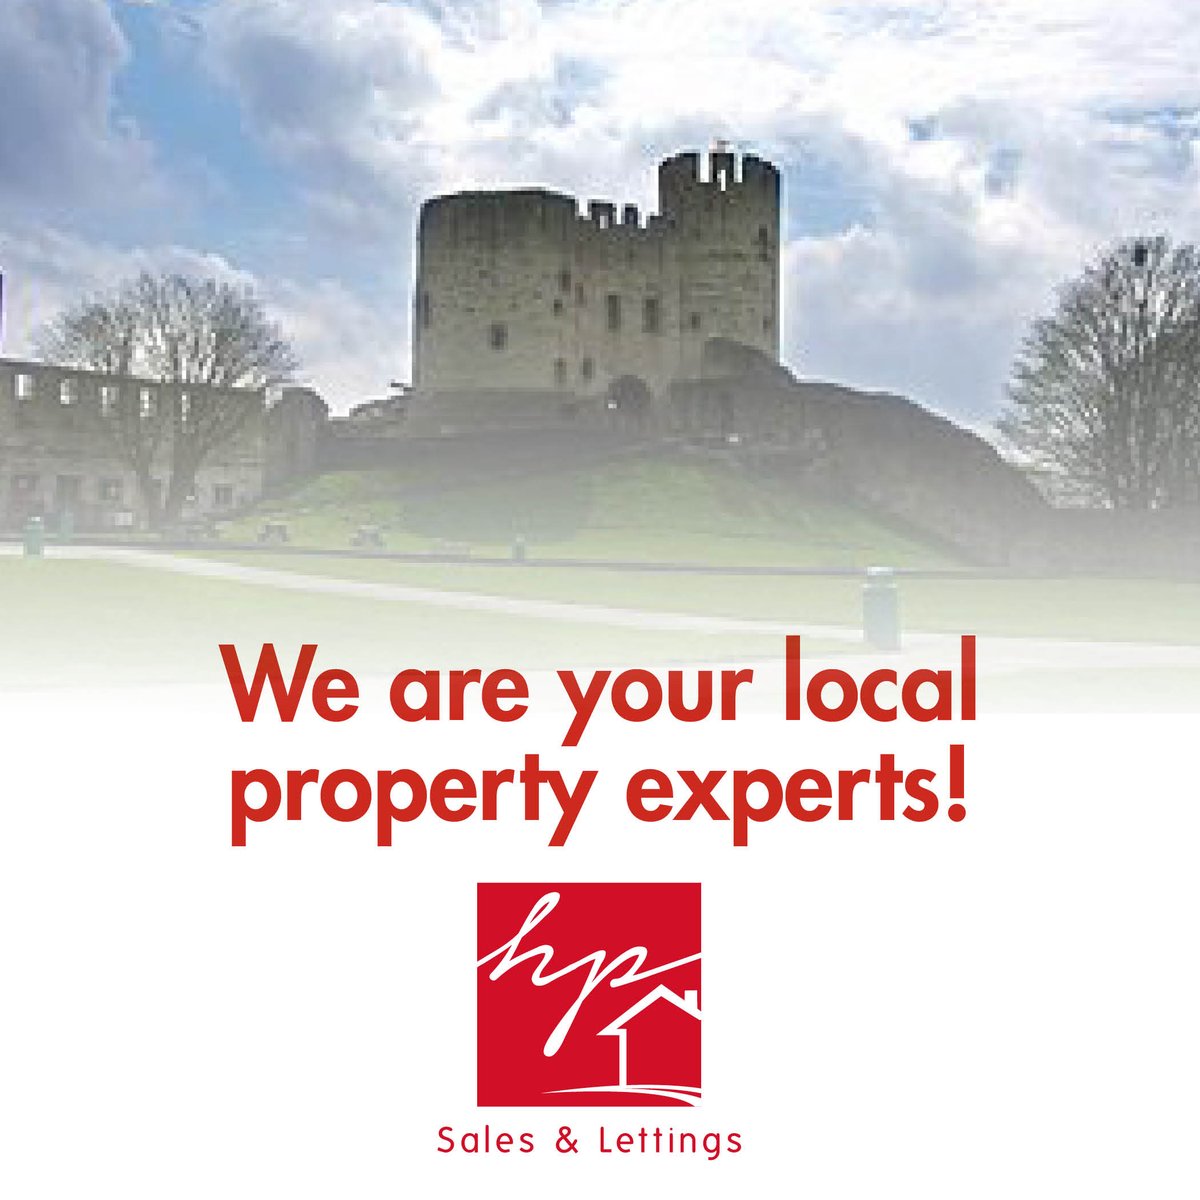 Are you living in Dudley and searching for a new home? 
We are your local property experts! 🏡 

#LocalPropertyExperts